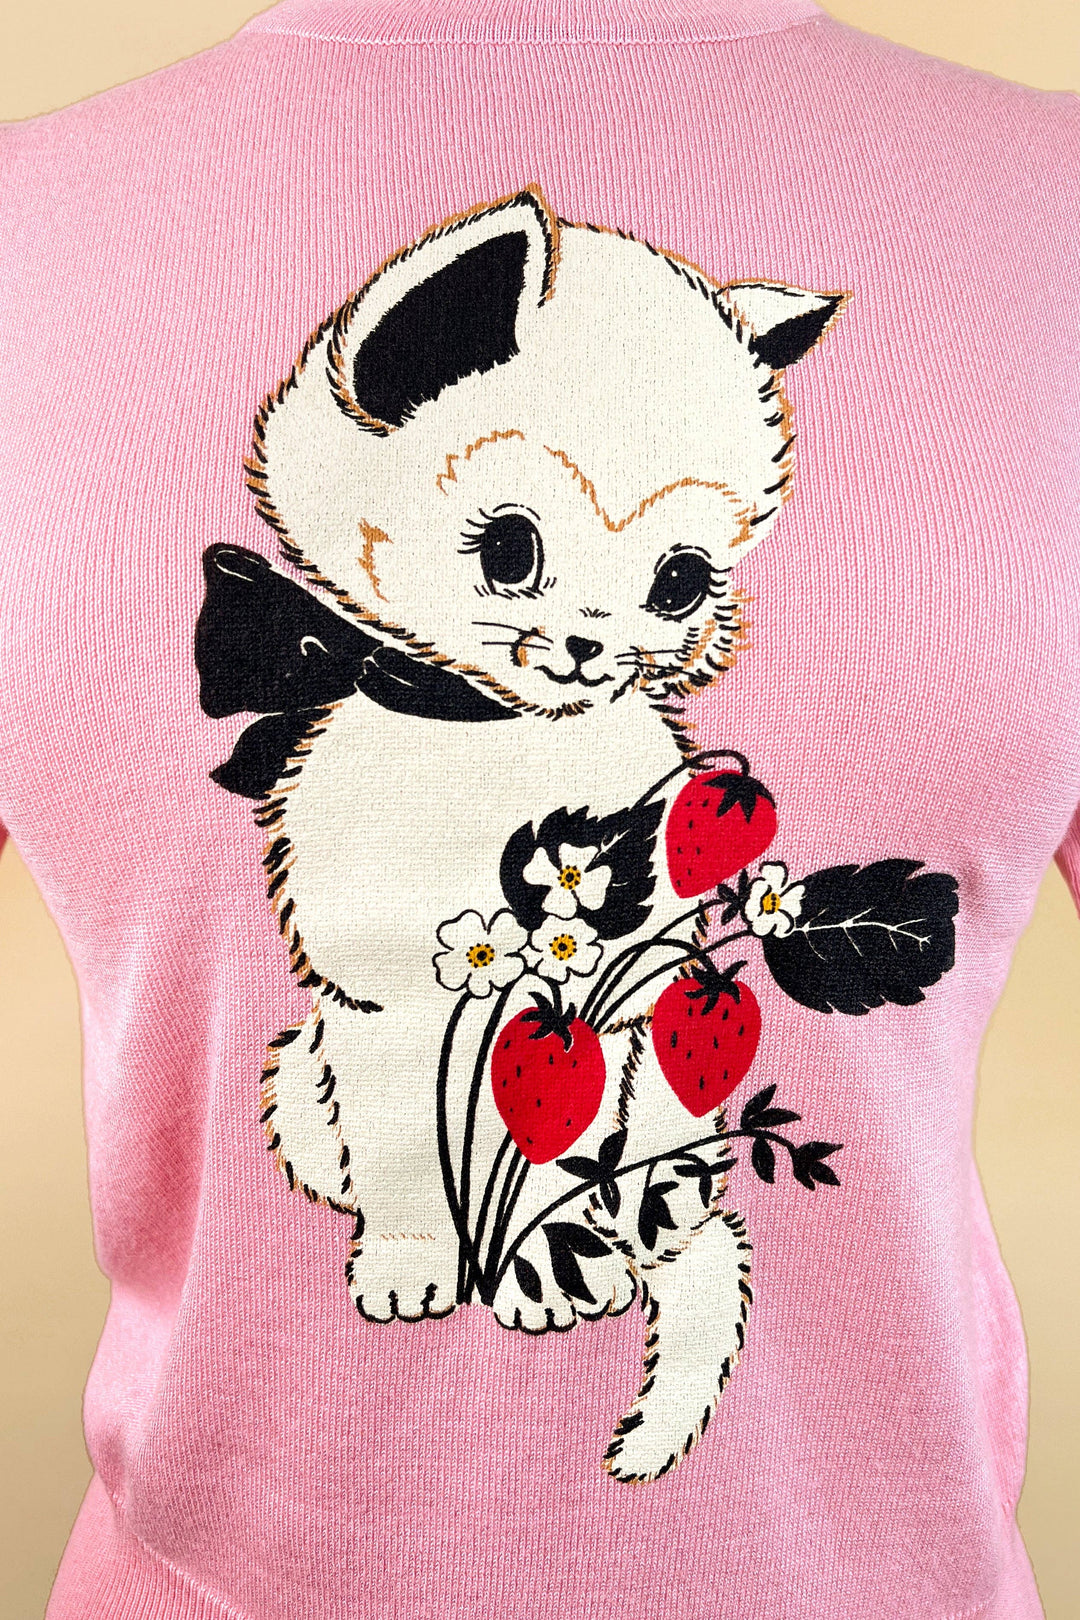 Strawberry Fields Forever short sleeve Sweater in Pink